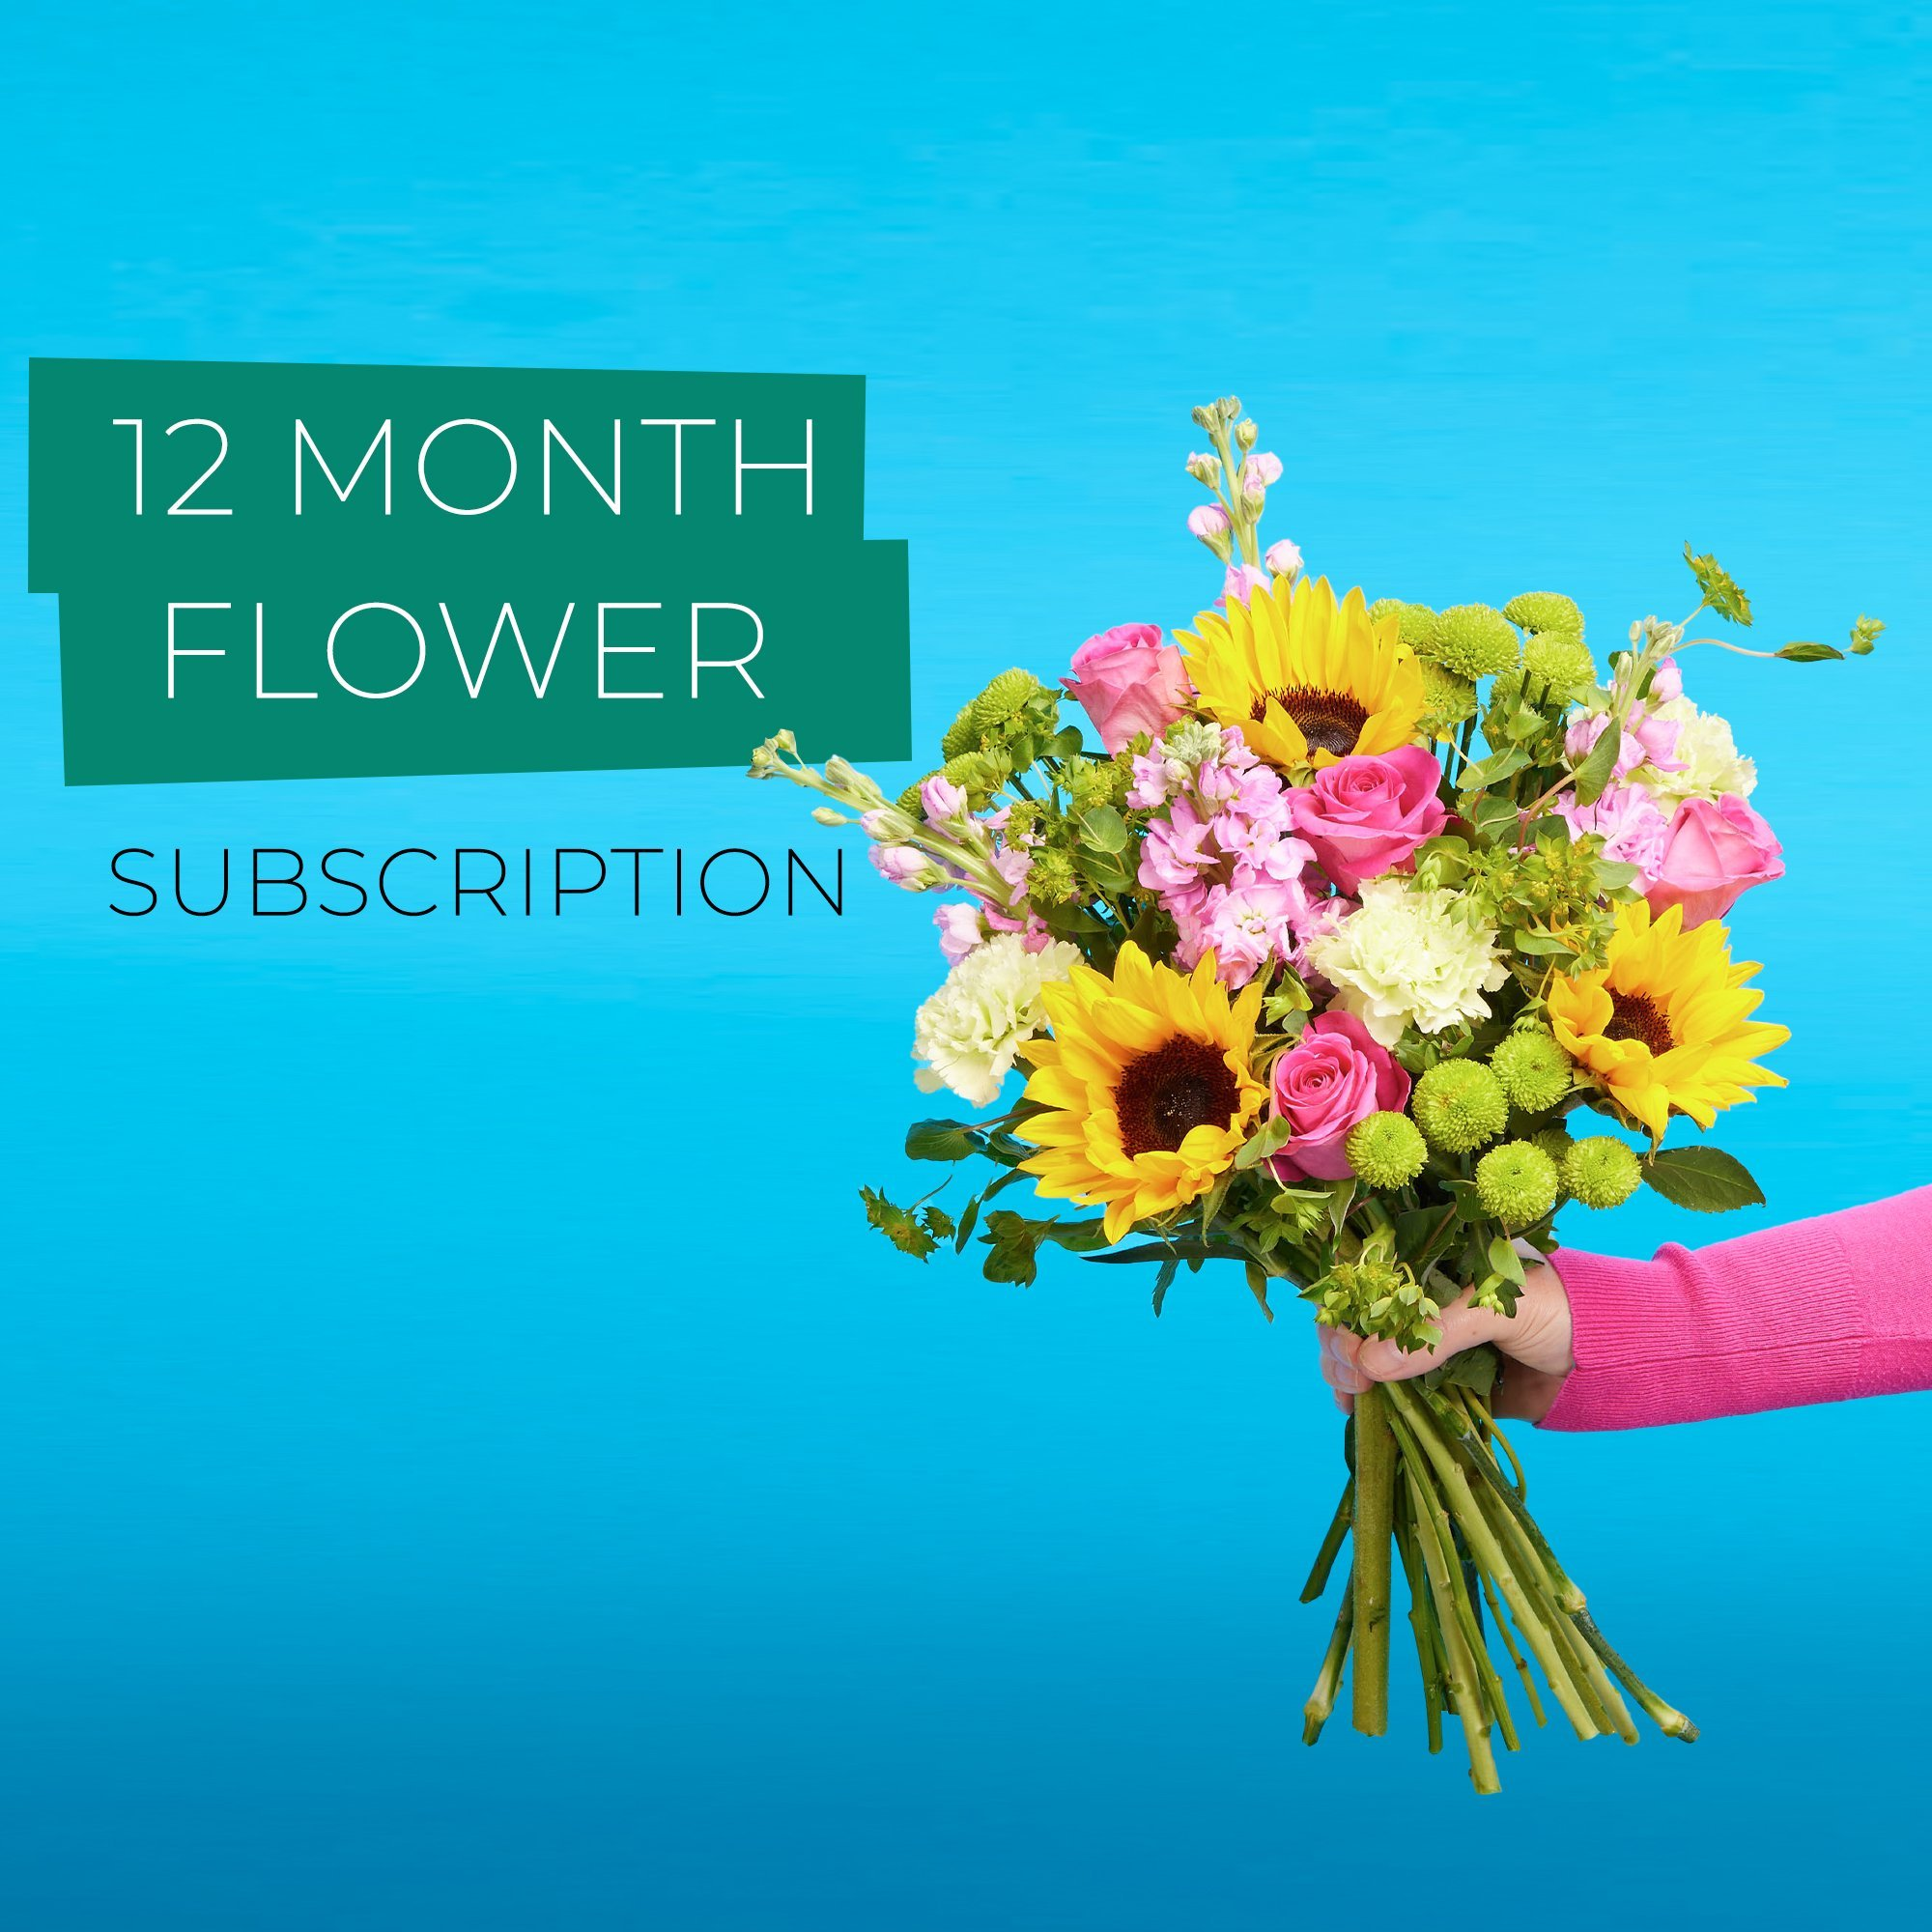 12 Month Flower Subscription image